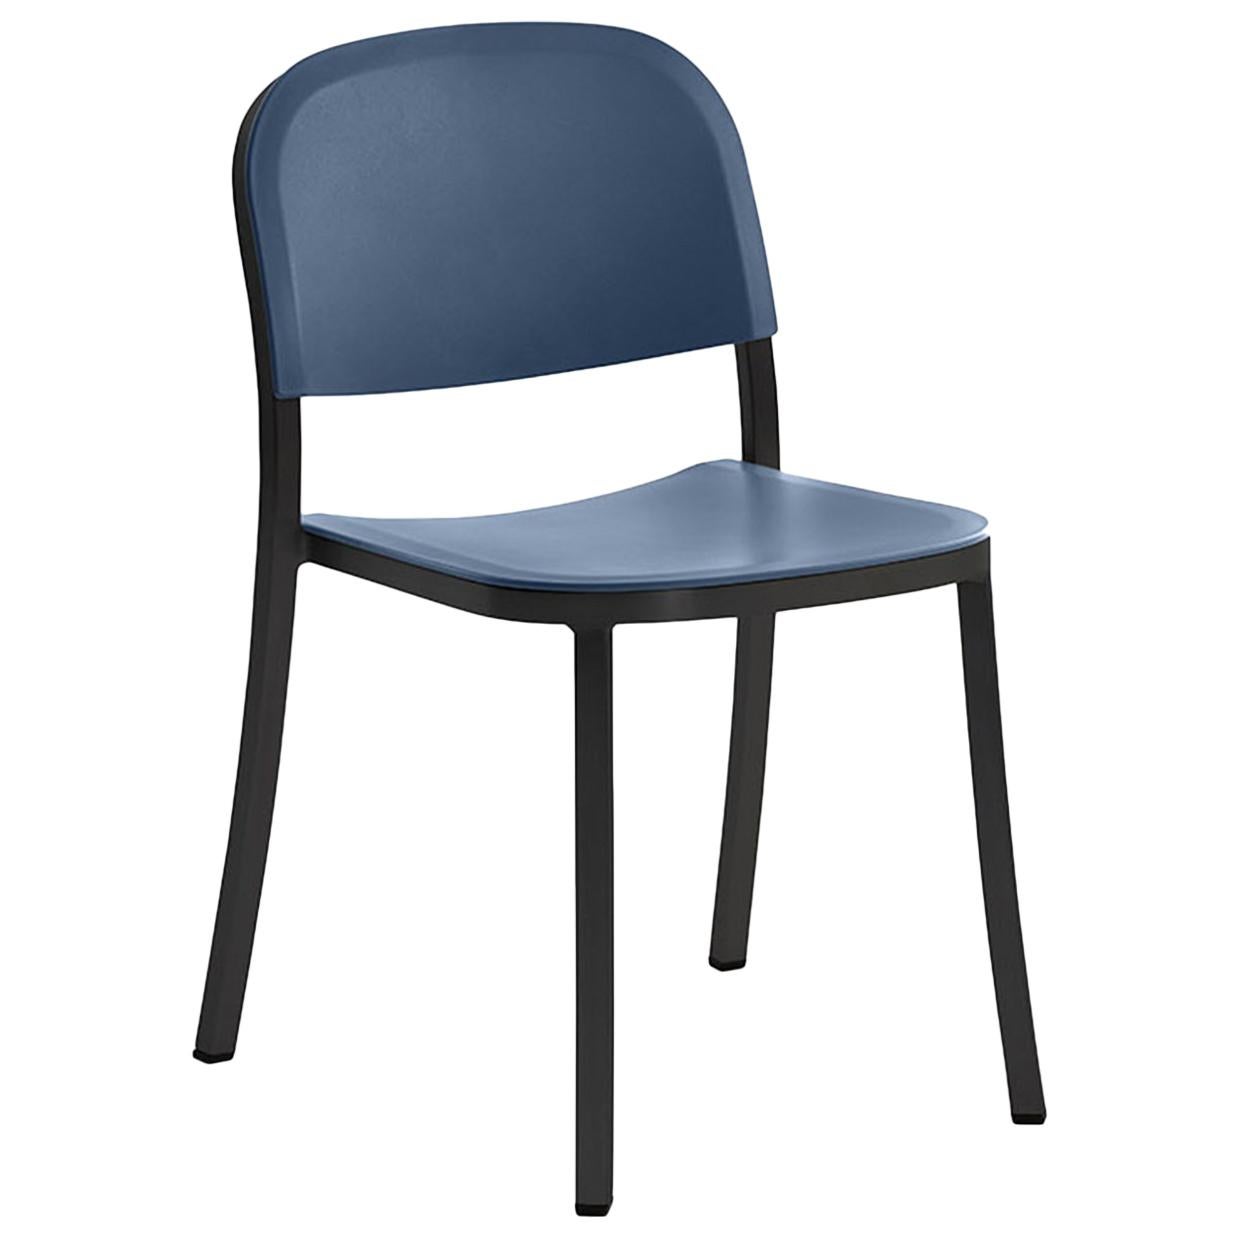 Emeco 1 Inch Stacking Chair in Dark Aluminum and Blue by Jasper Morrison For Sale